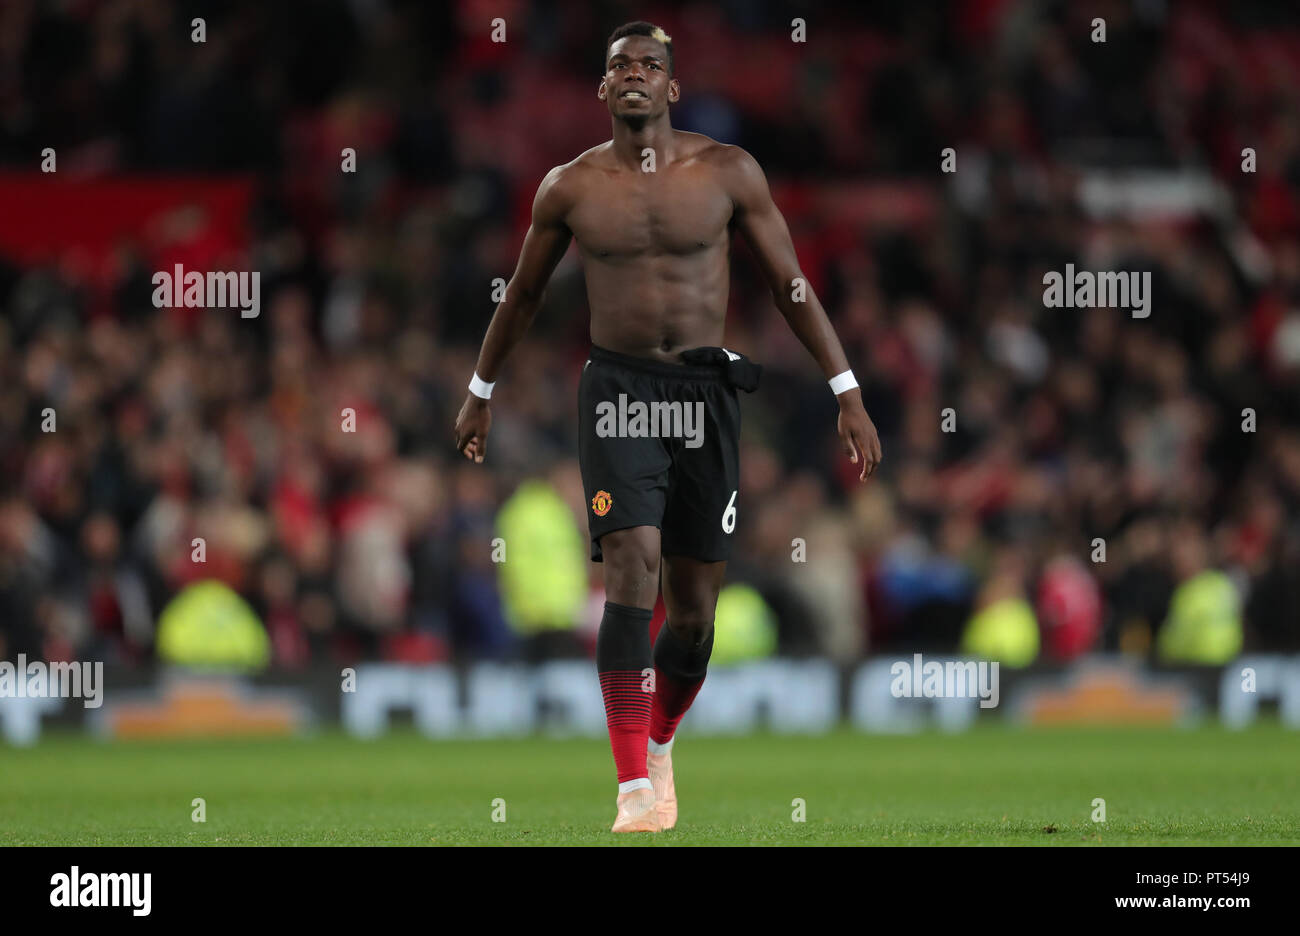 Paul Pogba MANCHESTER UNITED FC V NEWCASTLE UNITED FC MANCHESTER UNITED FC V NEWCASTLE UNITED FC 06 October 2018 GBD12350 PREMIER LEAGUE 06/10/18 OLD TRAFFORD, MANCHESTER STRICTLY EDITORIAL USE ONLY. If The Player/Players Depicted In This Image Is/Are Playing For An English Club Or The England National Team. Then This Image May Only Be Used For Editorial Purposes. No Commercial Use. The Following Usages Are Also Restricted EVEN IF IN AN EDITORIAL CONTEXT: Use in conjuction with, or part of, any unauthorized audio, video, data, fixture lists, club/league logos, Betting, Games o Stock Photo